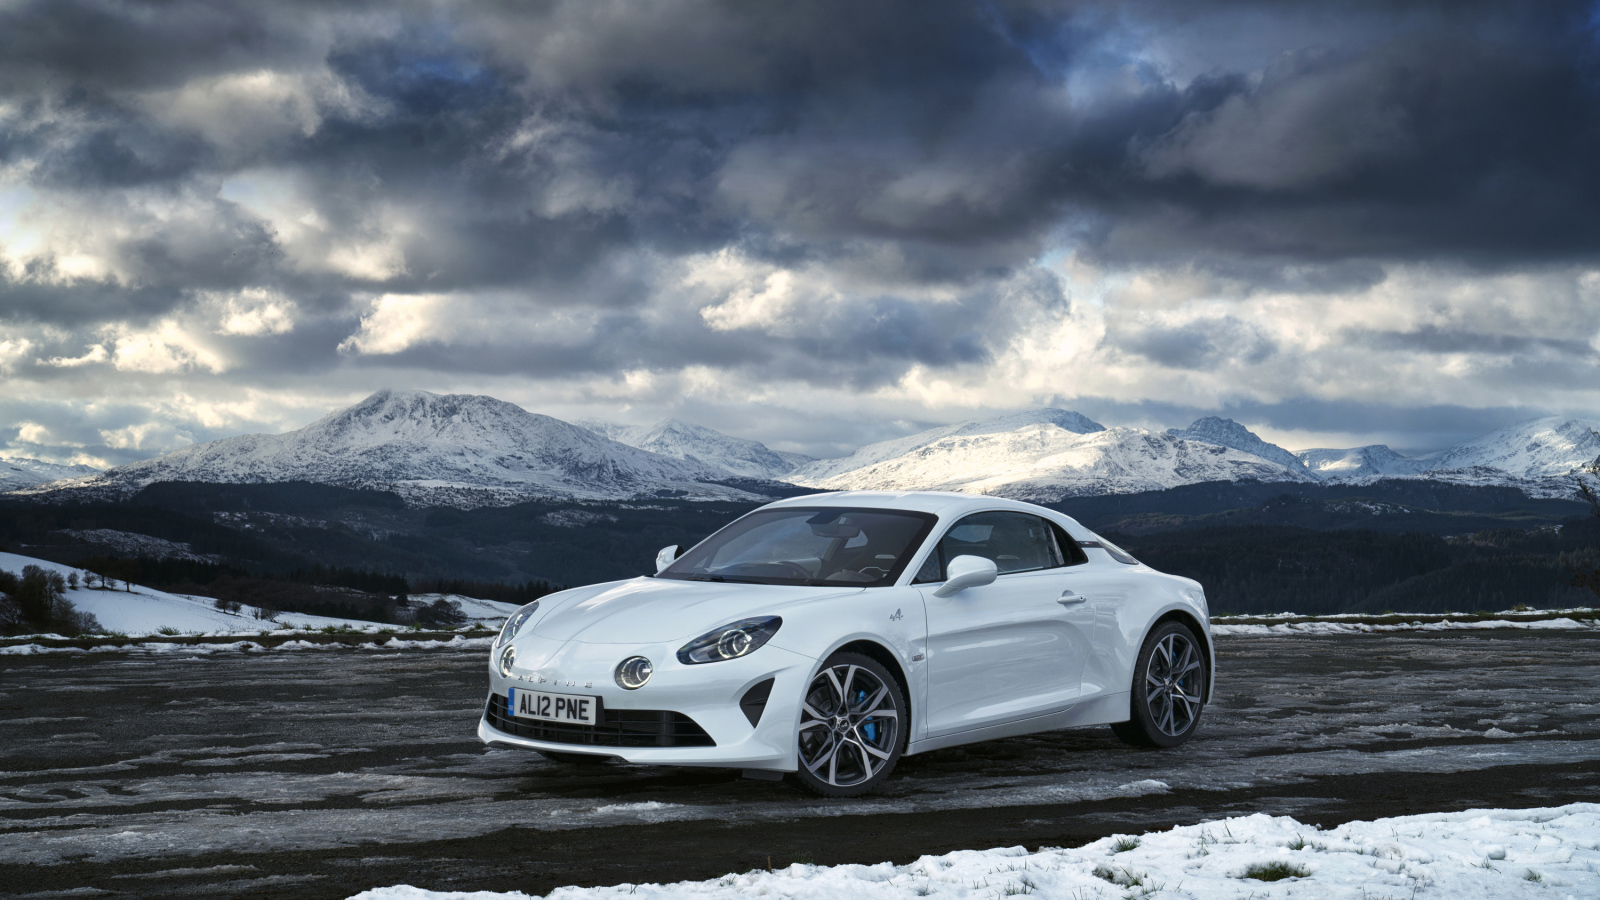 White car Alpine A110 on a background of mountains under a stormy sky